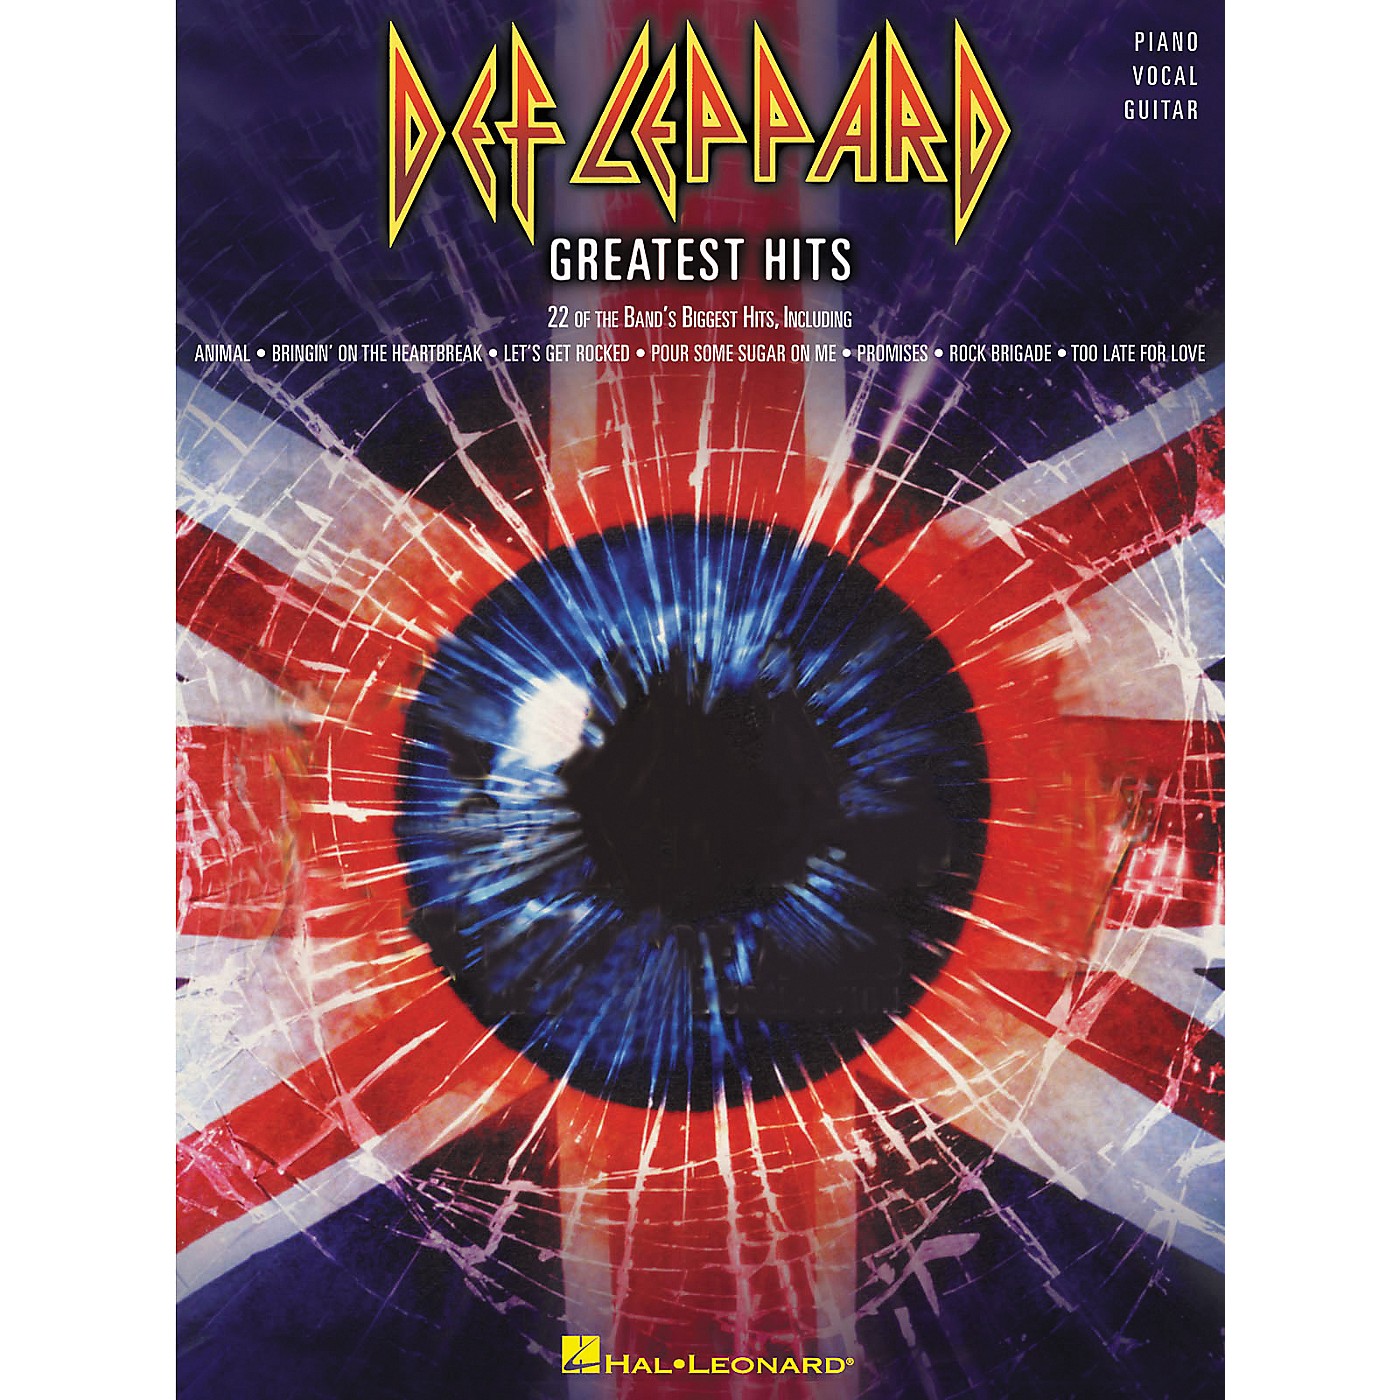 Hal Leonard Def Leppard Greatest Hits Piano, Vocal, Guitar Songbook thumbnail